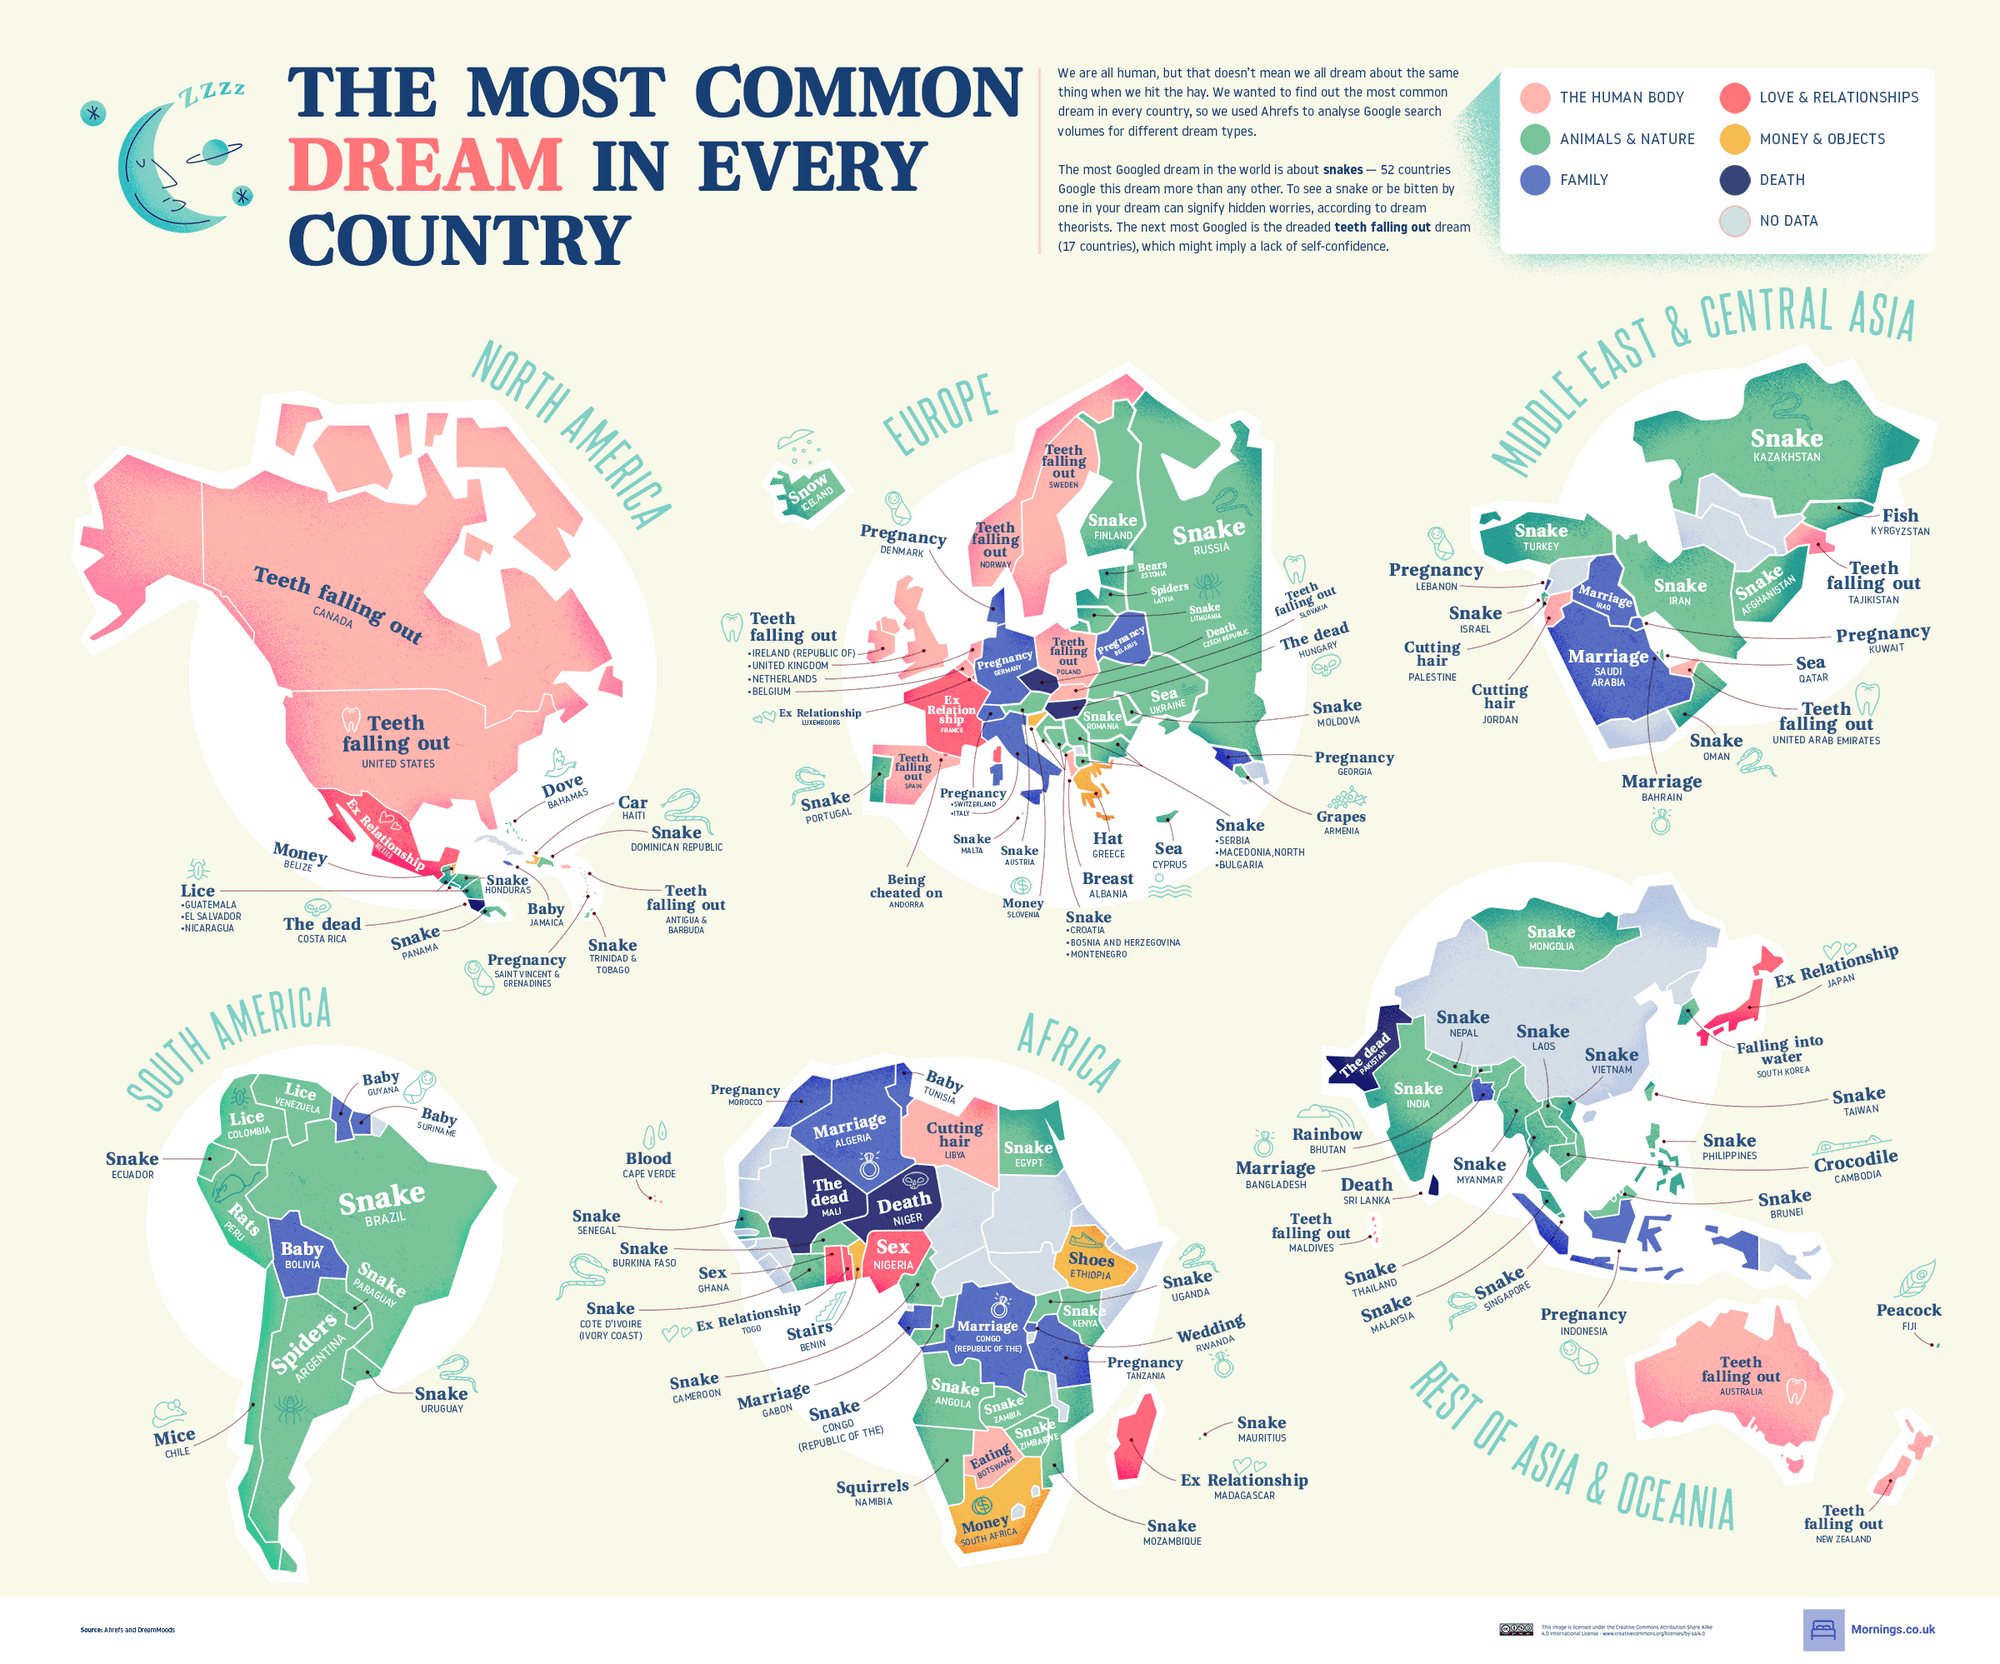 The Most Common Dream in Every Country